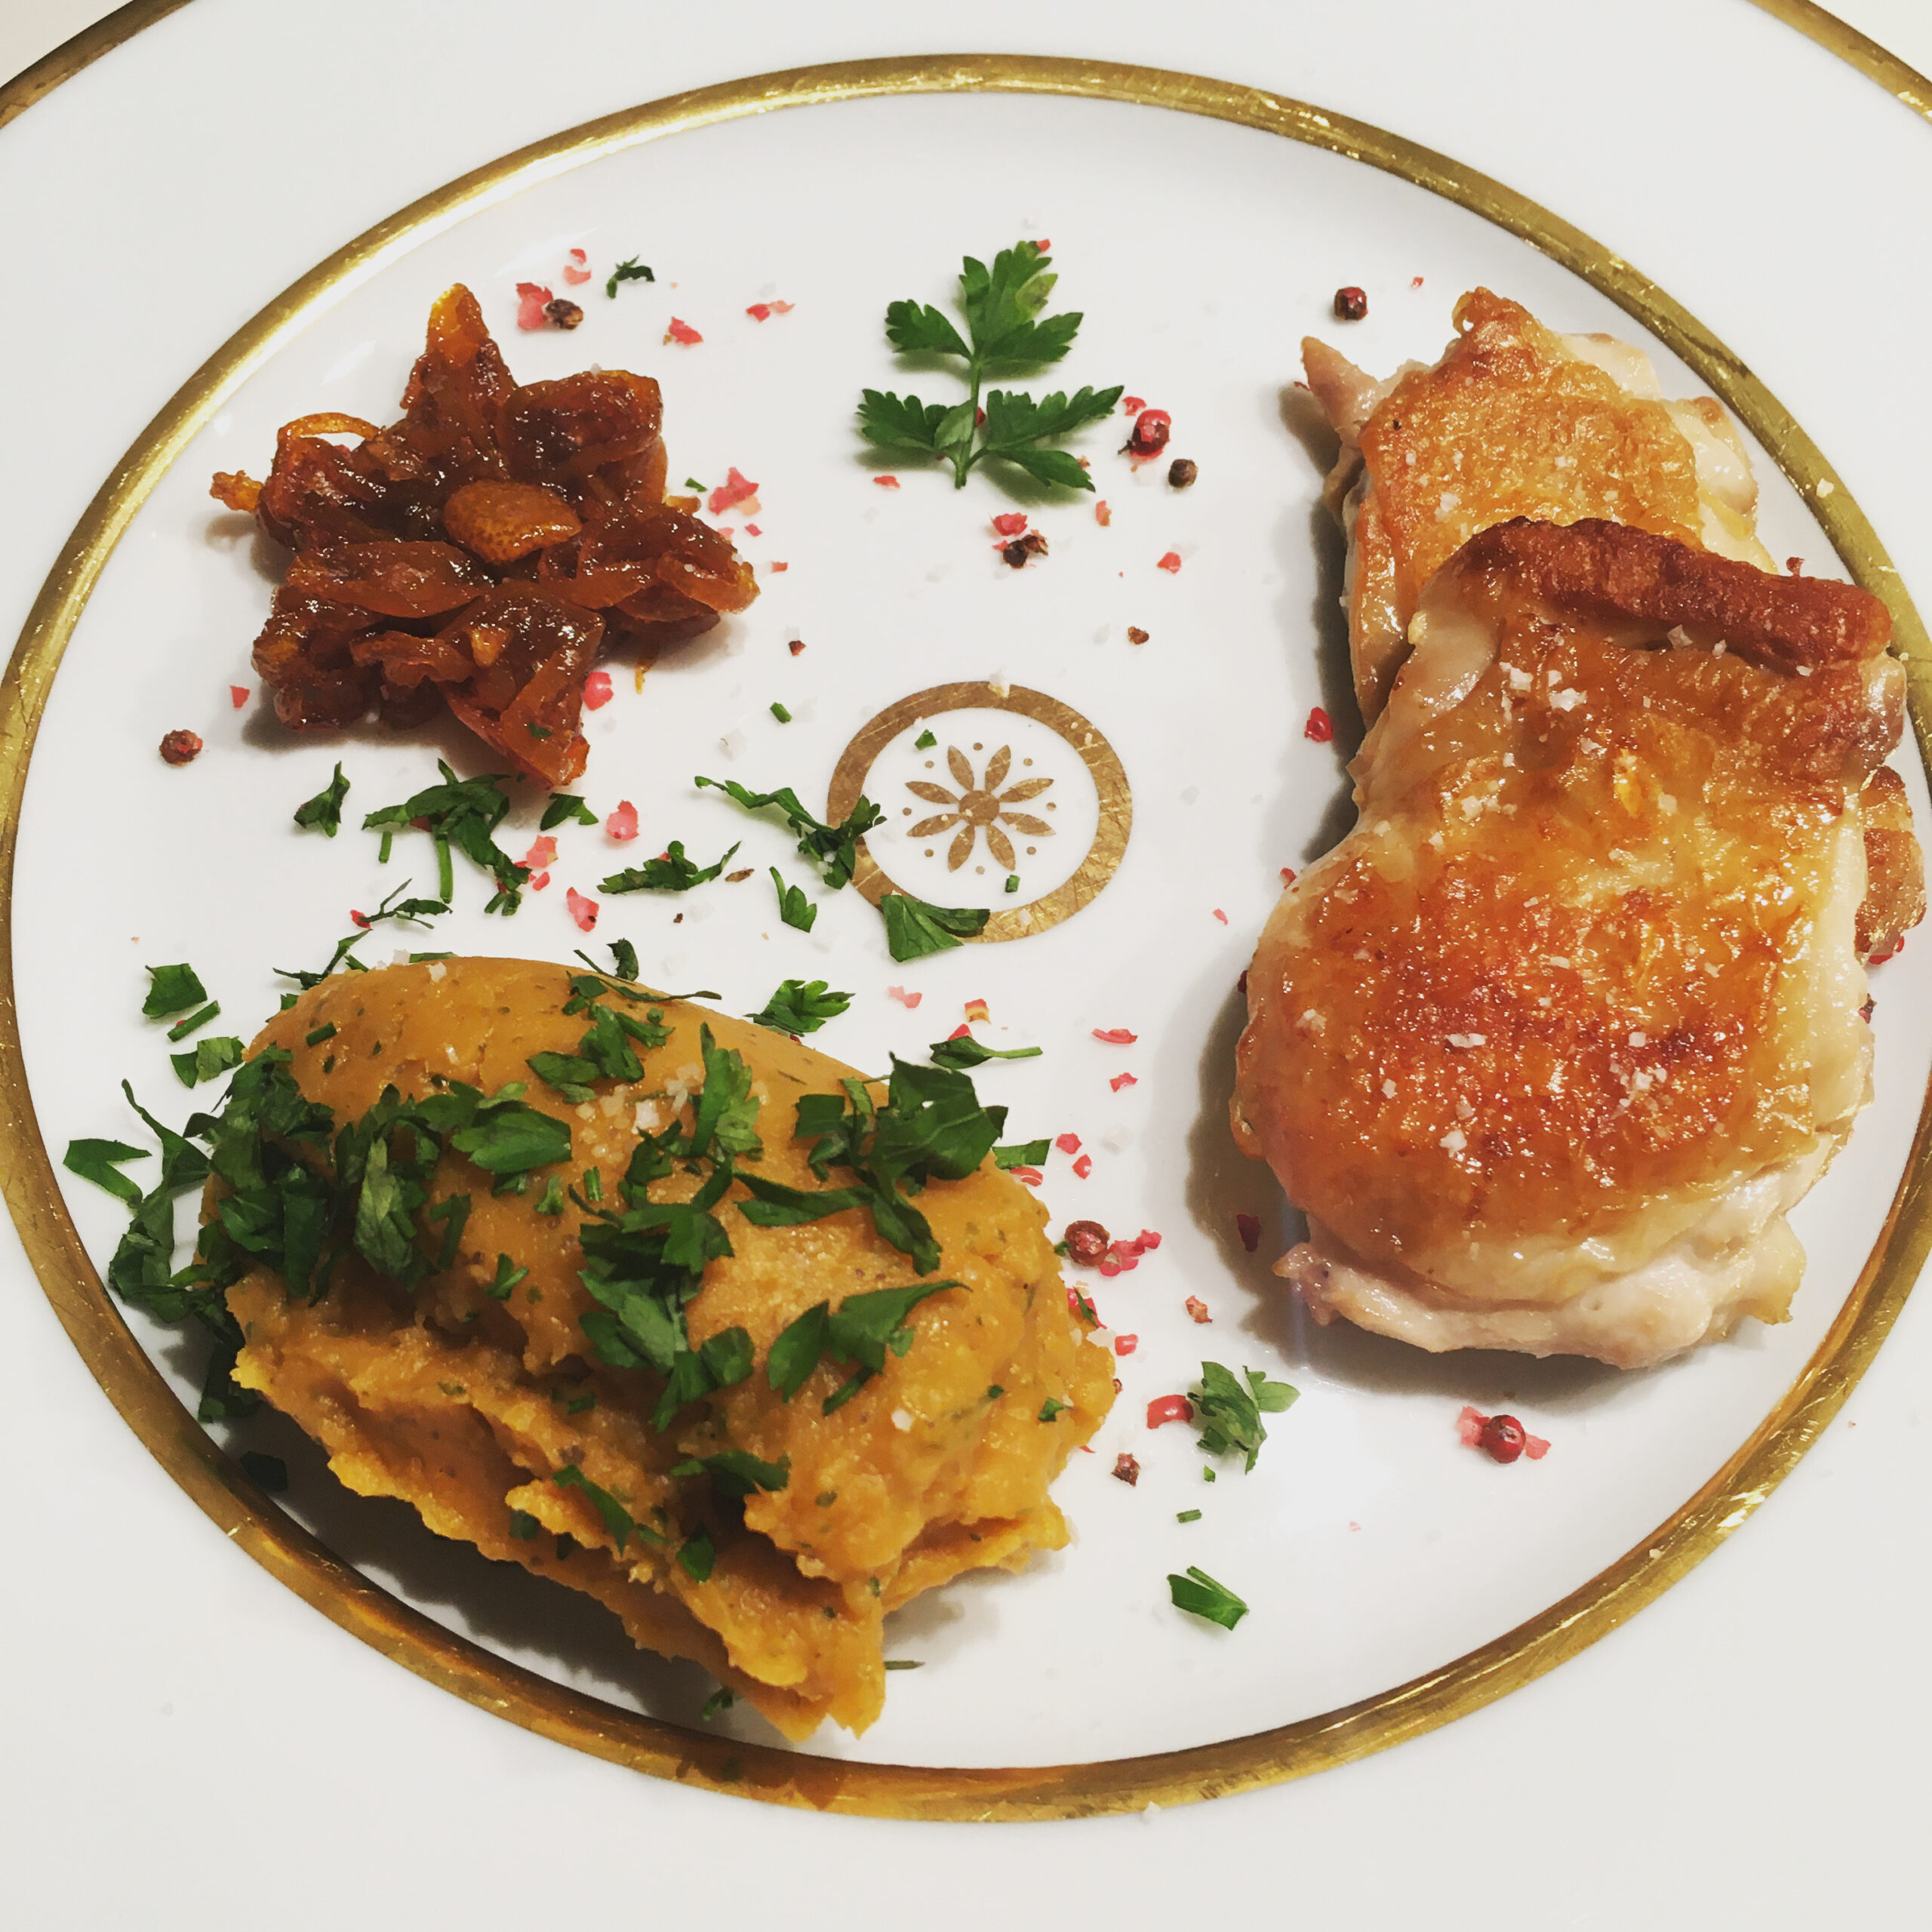 Roasted quail (or chicken) breasts with eggplant sweet potato mash & kumquat compote